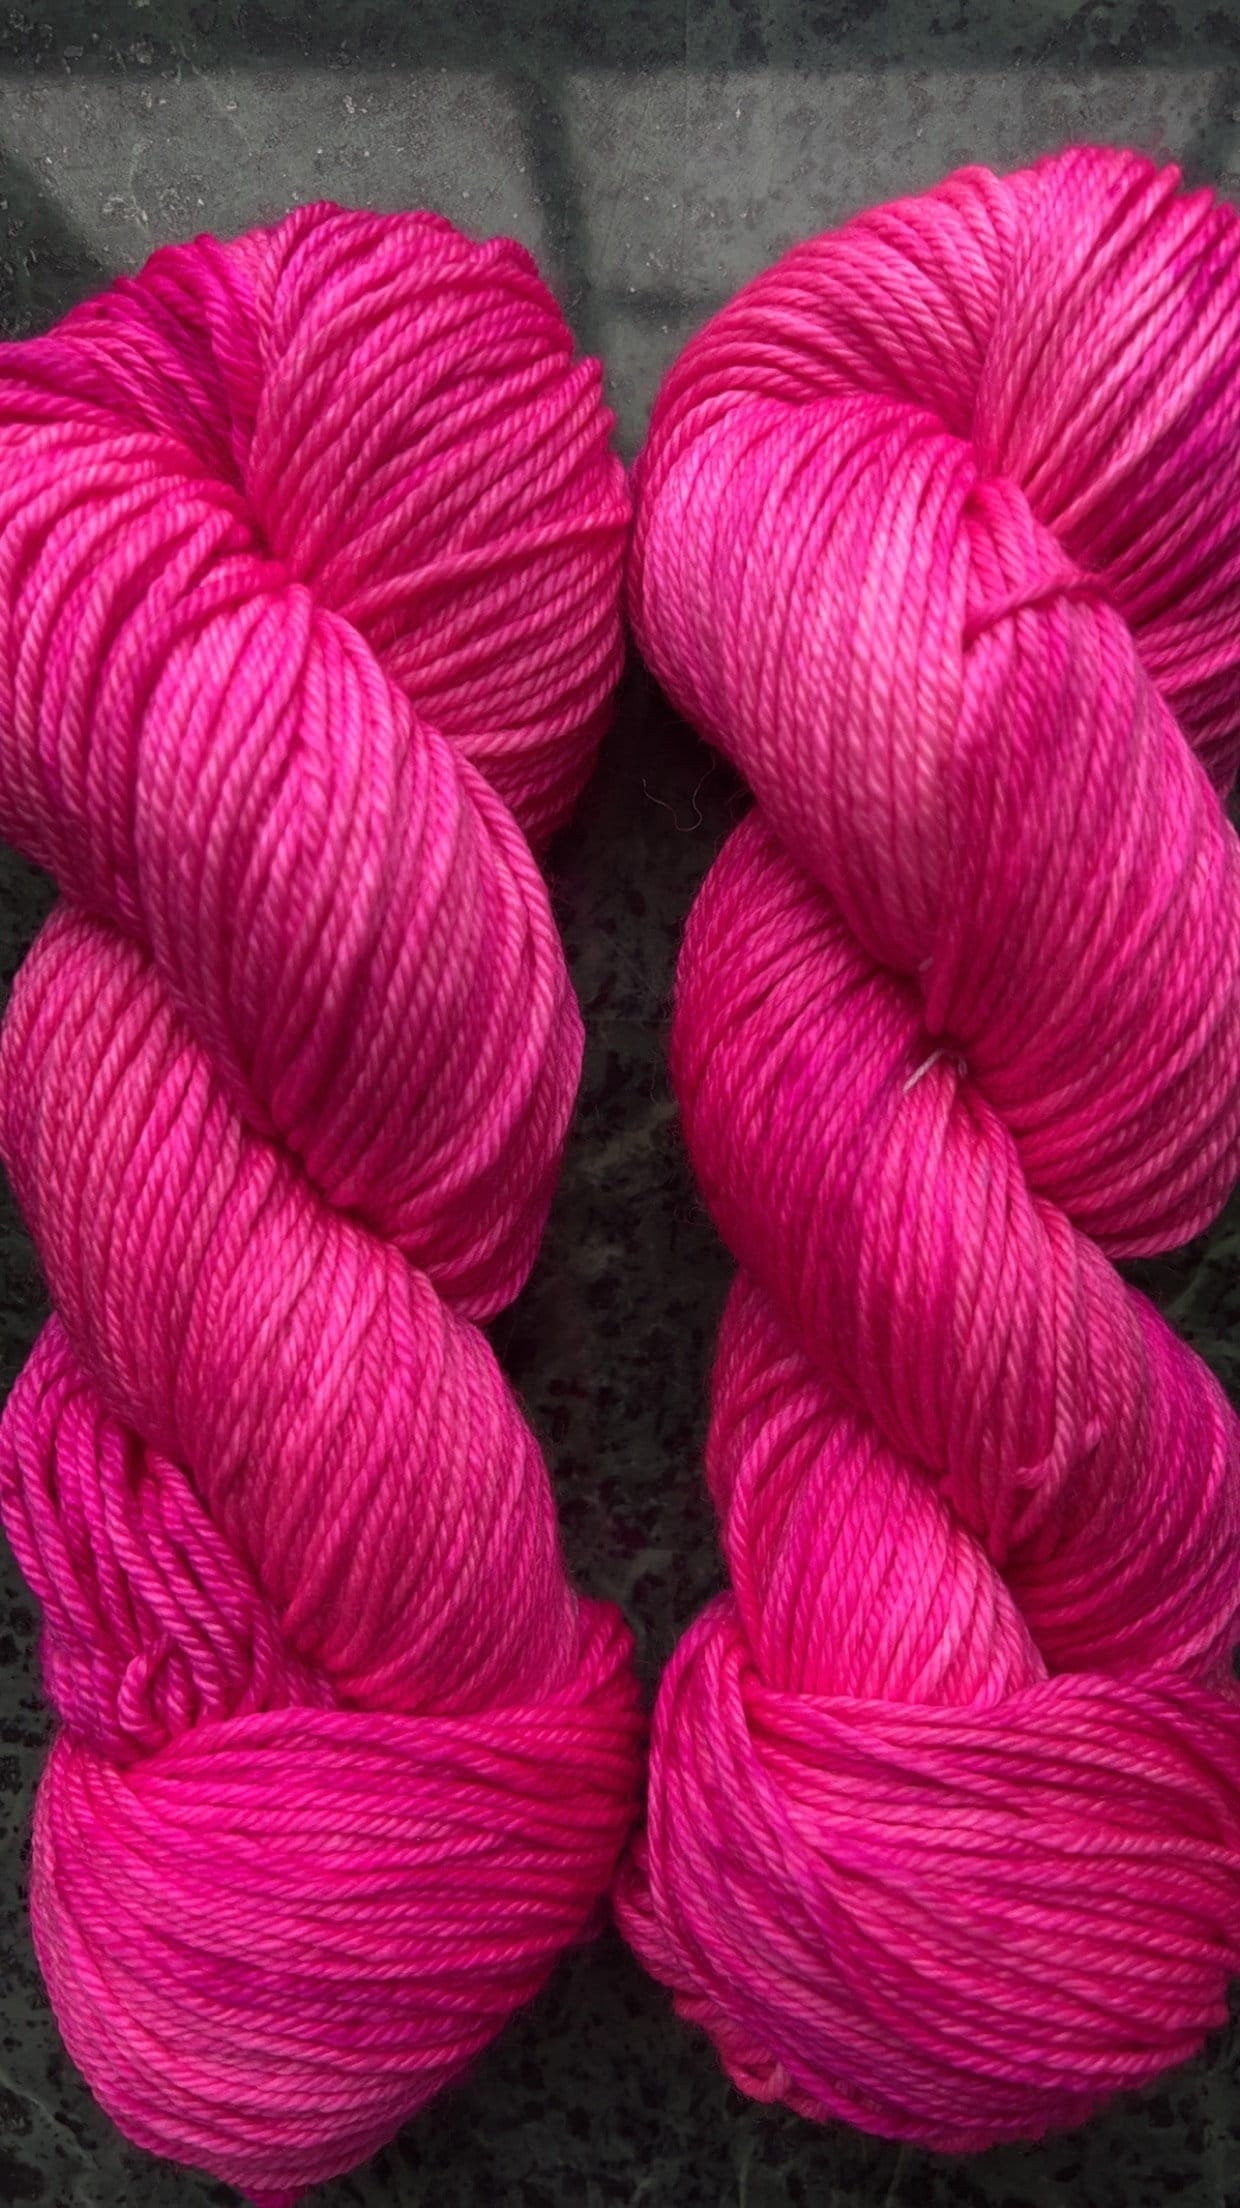 Hand-Dyed Merino Wool Yarn - Soft and Durable Yarn for Knitting and Crocheting | Indie Dyed Merino Wool | Worsted | Pretty In...